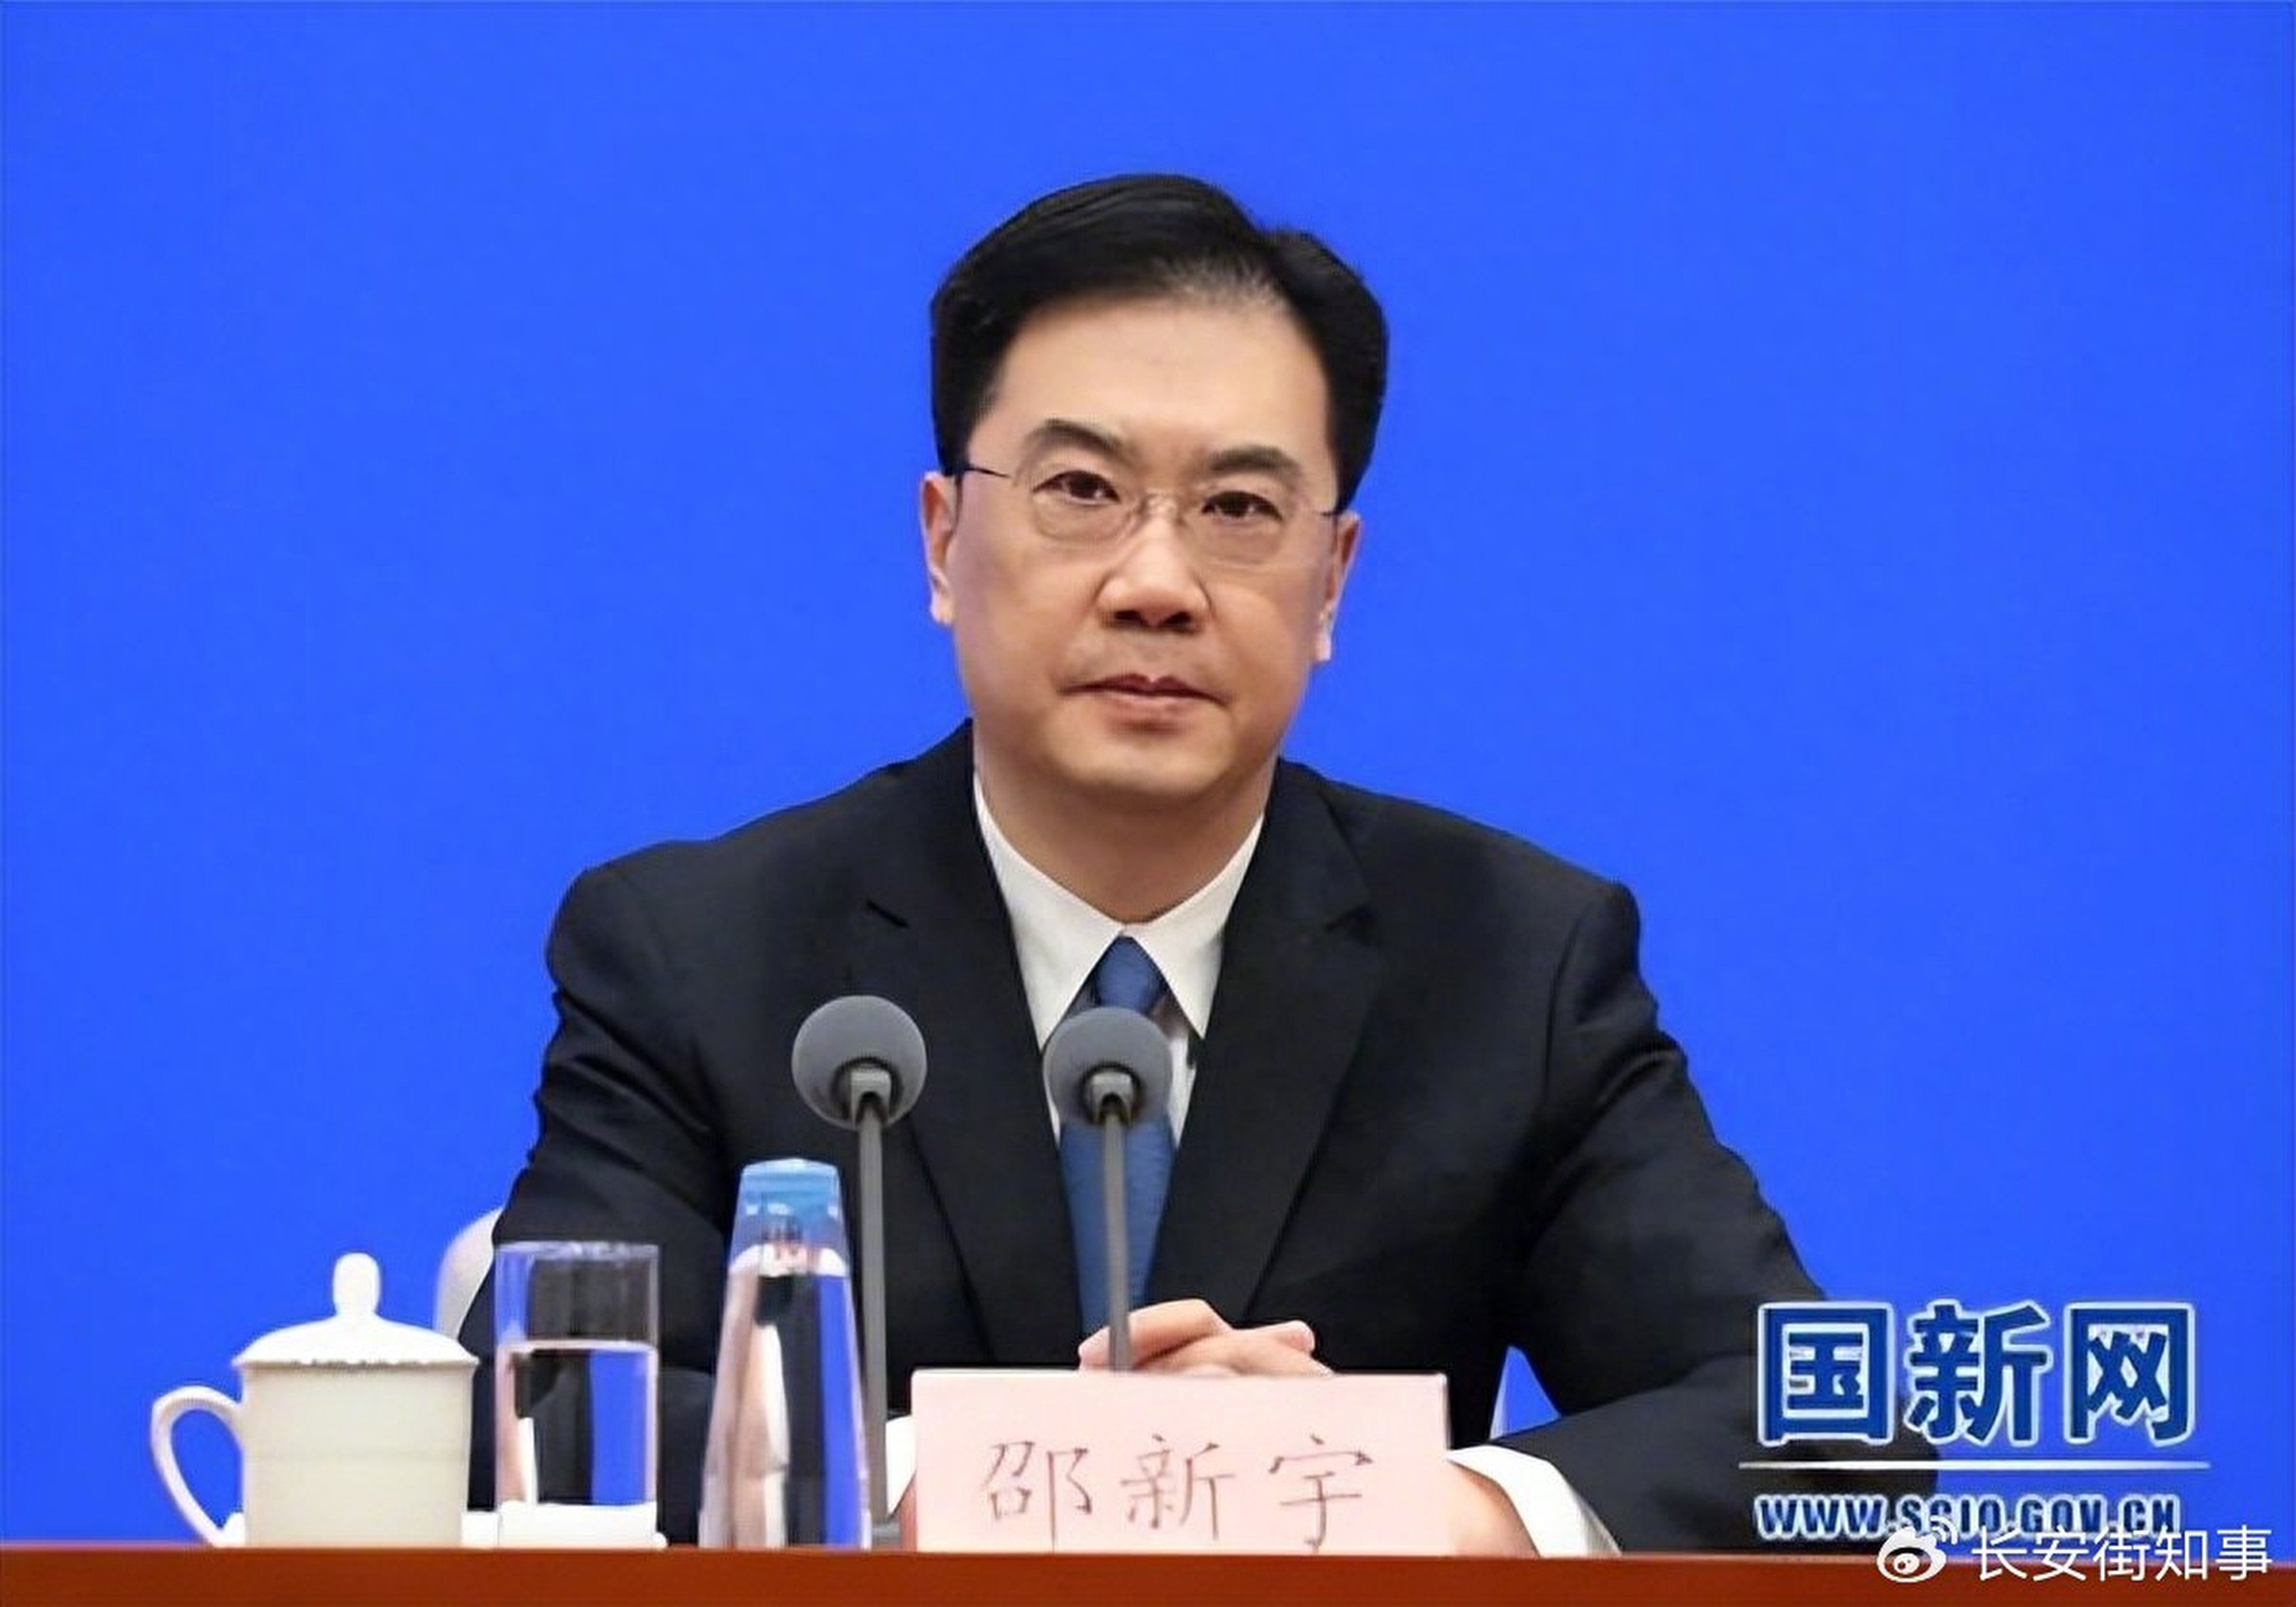 Shao Xinyu has been given a provincial leadership role in Hubei. Photo: Weibo